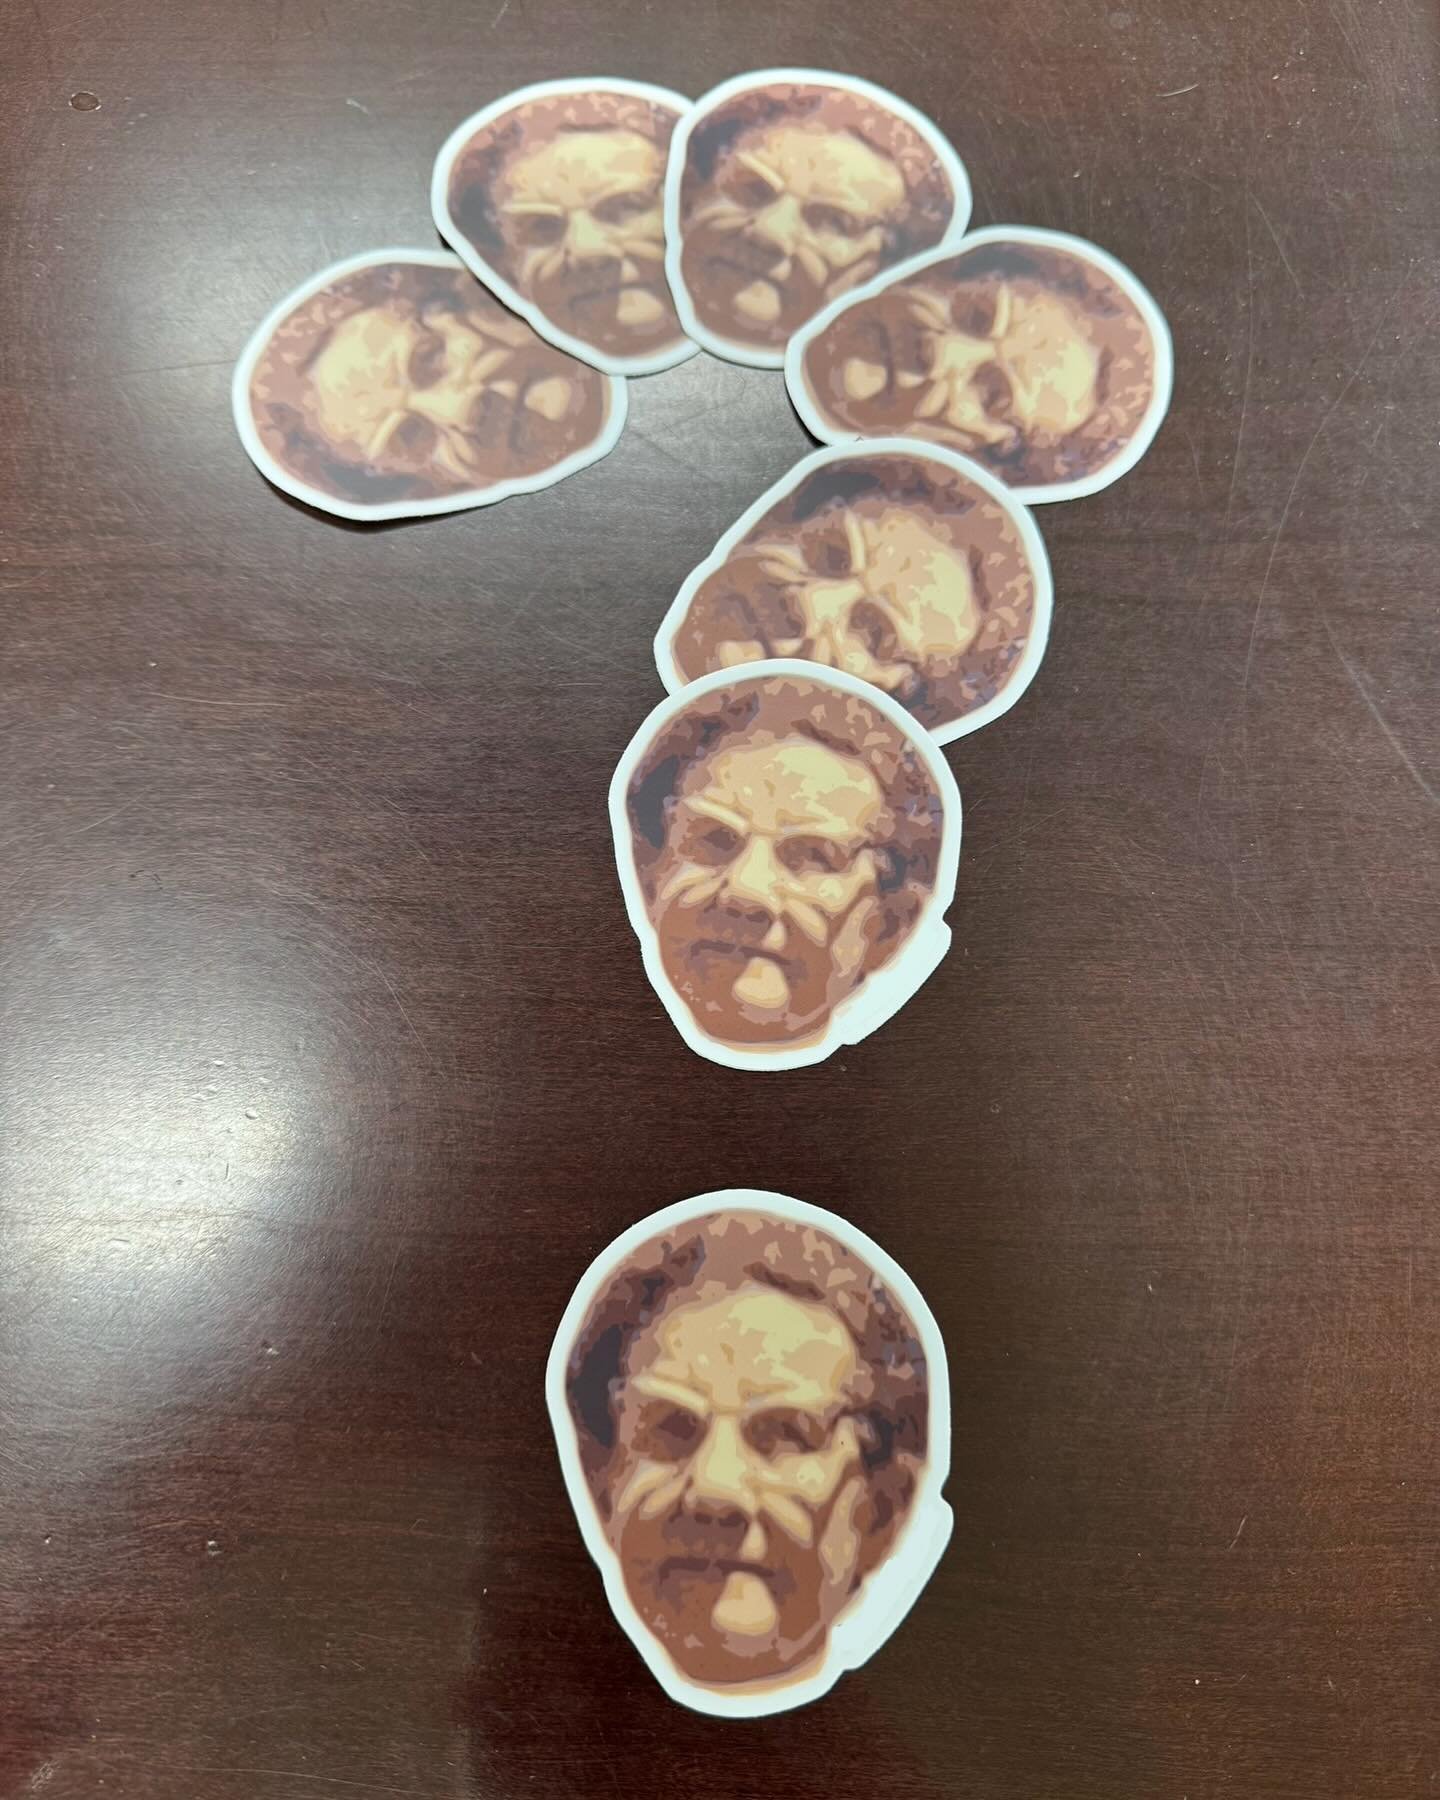 We will send one of these stickers to the first person to guess who it is! Do you know your Diamond Arrow history?

#followdaarrow #contest #winasticker #win #camplife